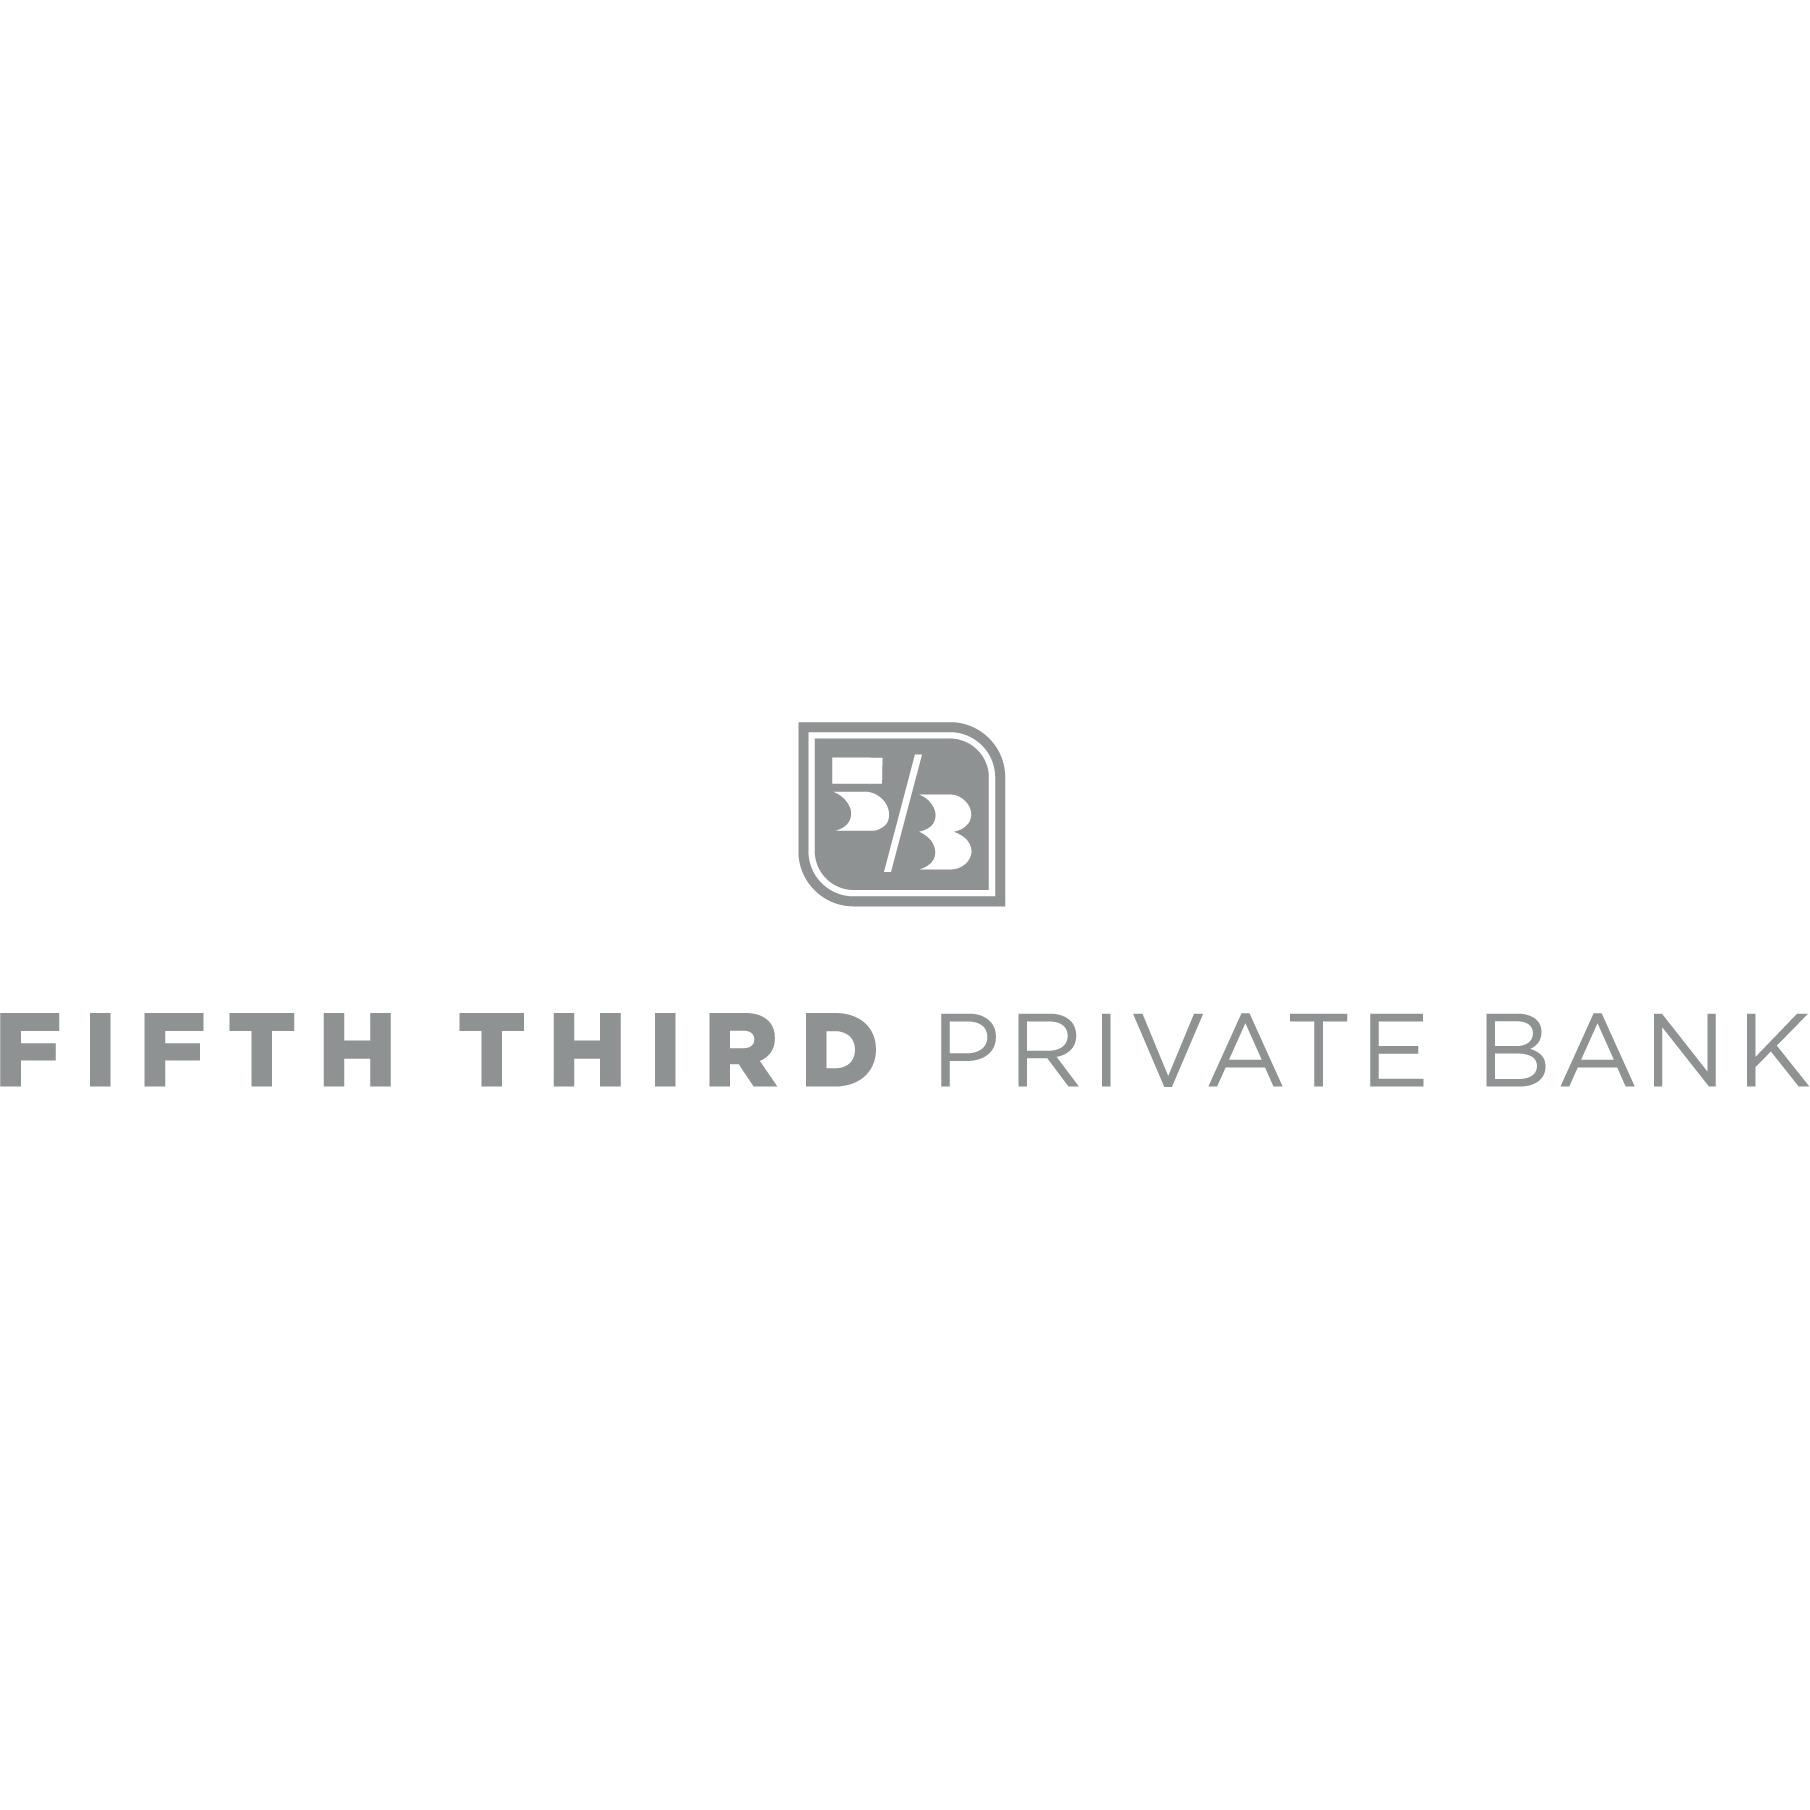 Fifth Third Private Bank - David Theiss